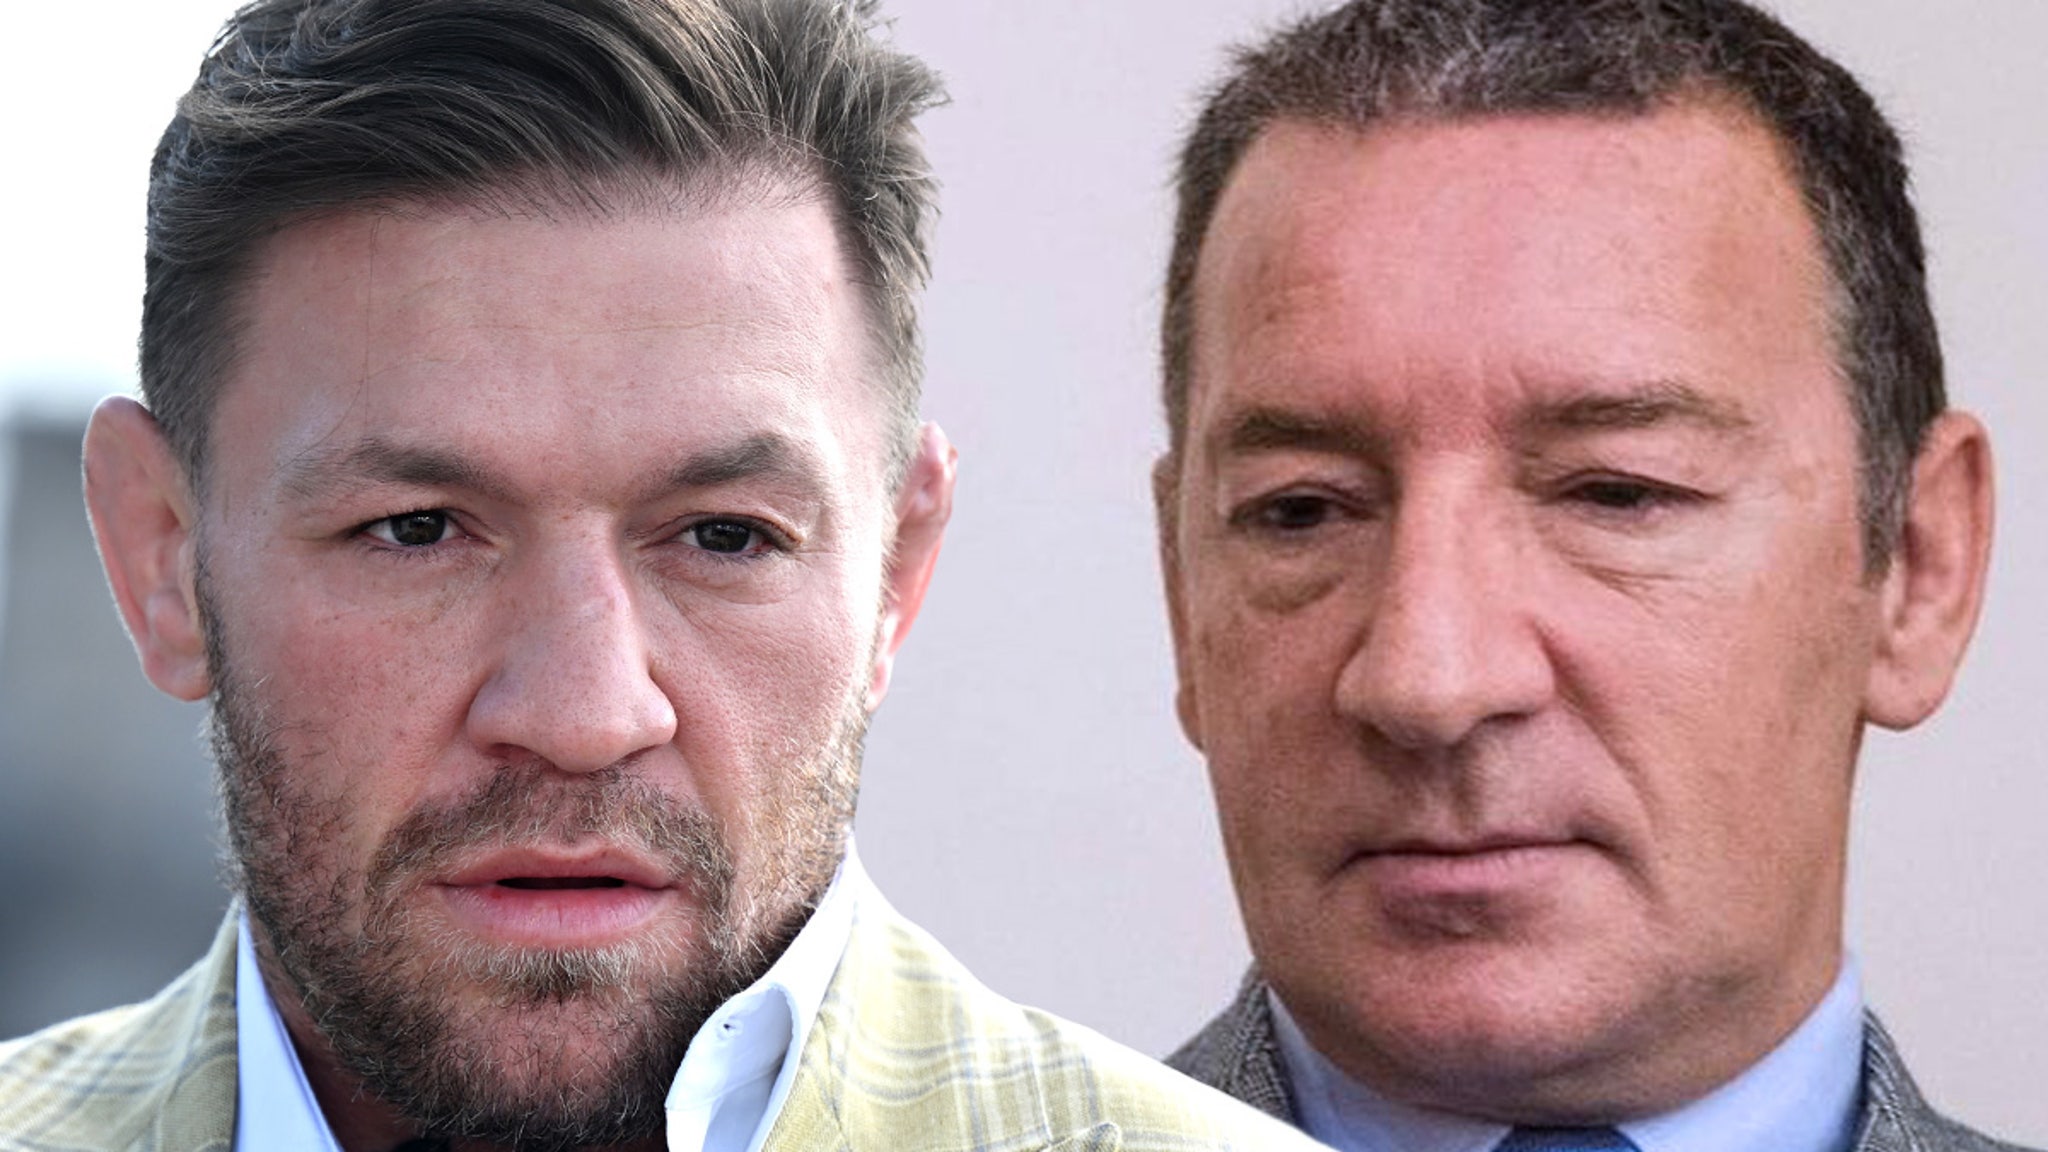 Conor McGregor's father, Tony, has been admitted to Ireland after medical concerns